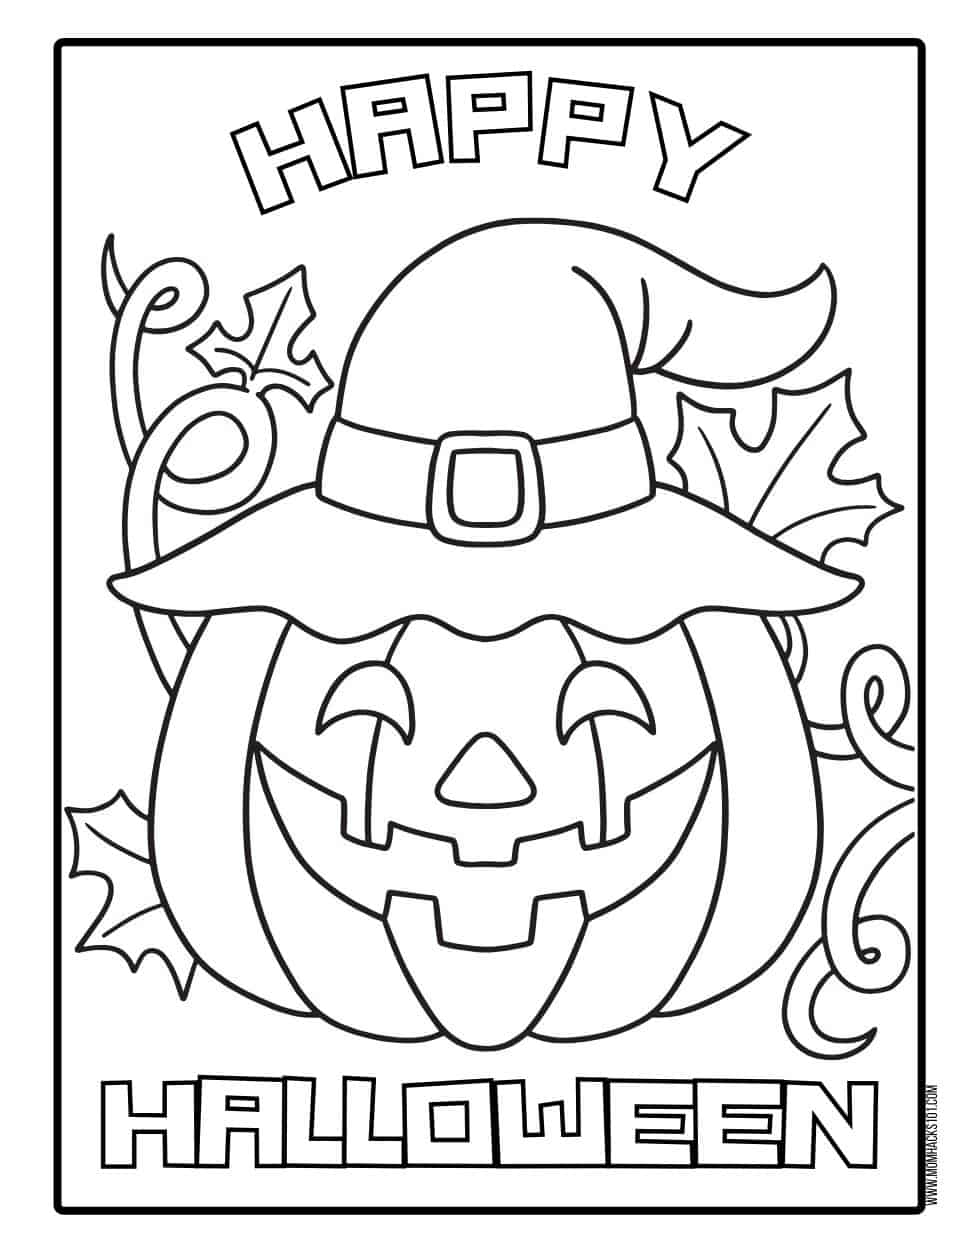 Happy Halloween coloring sheets free